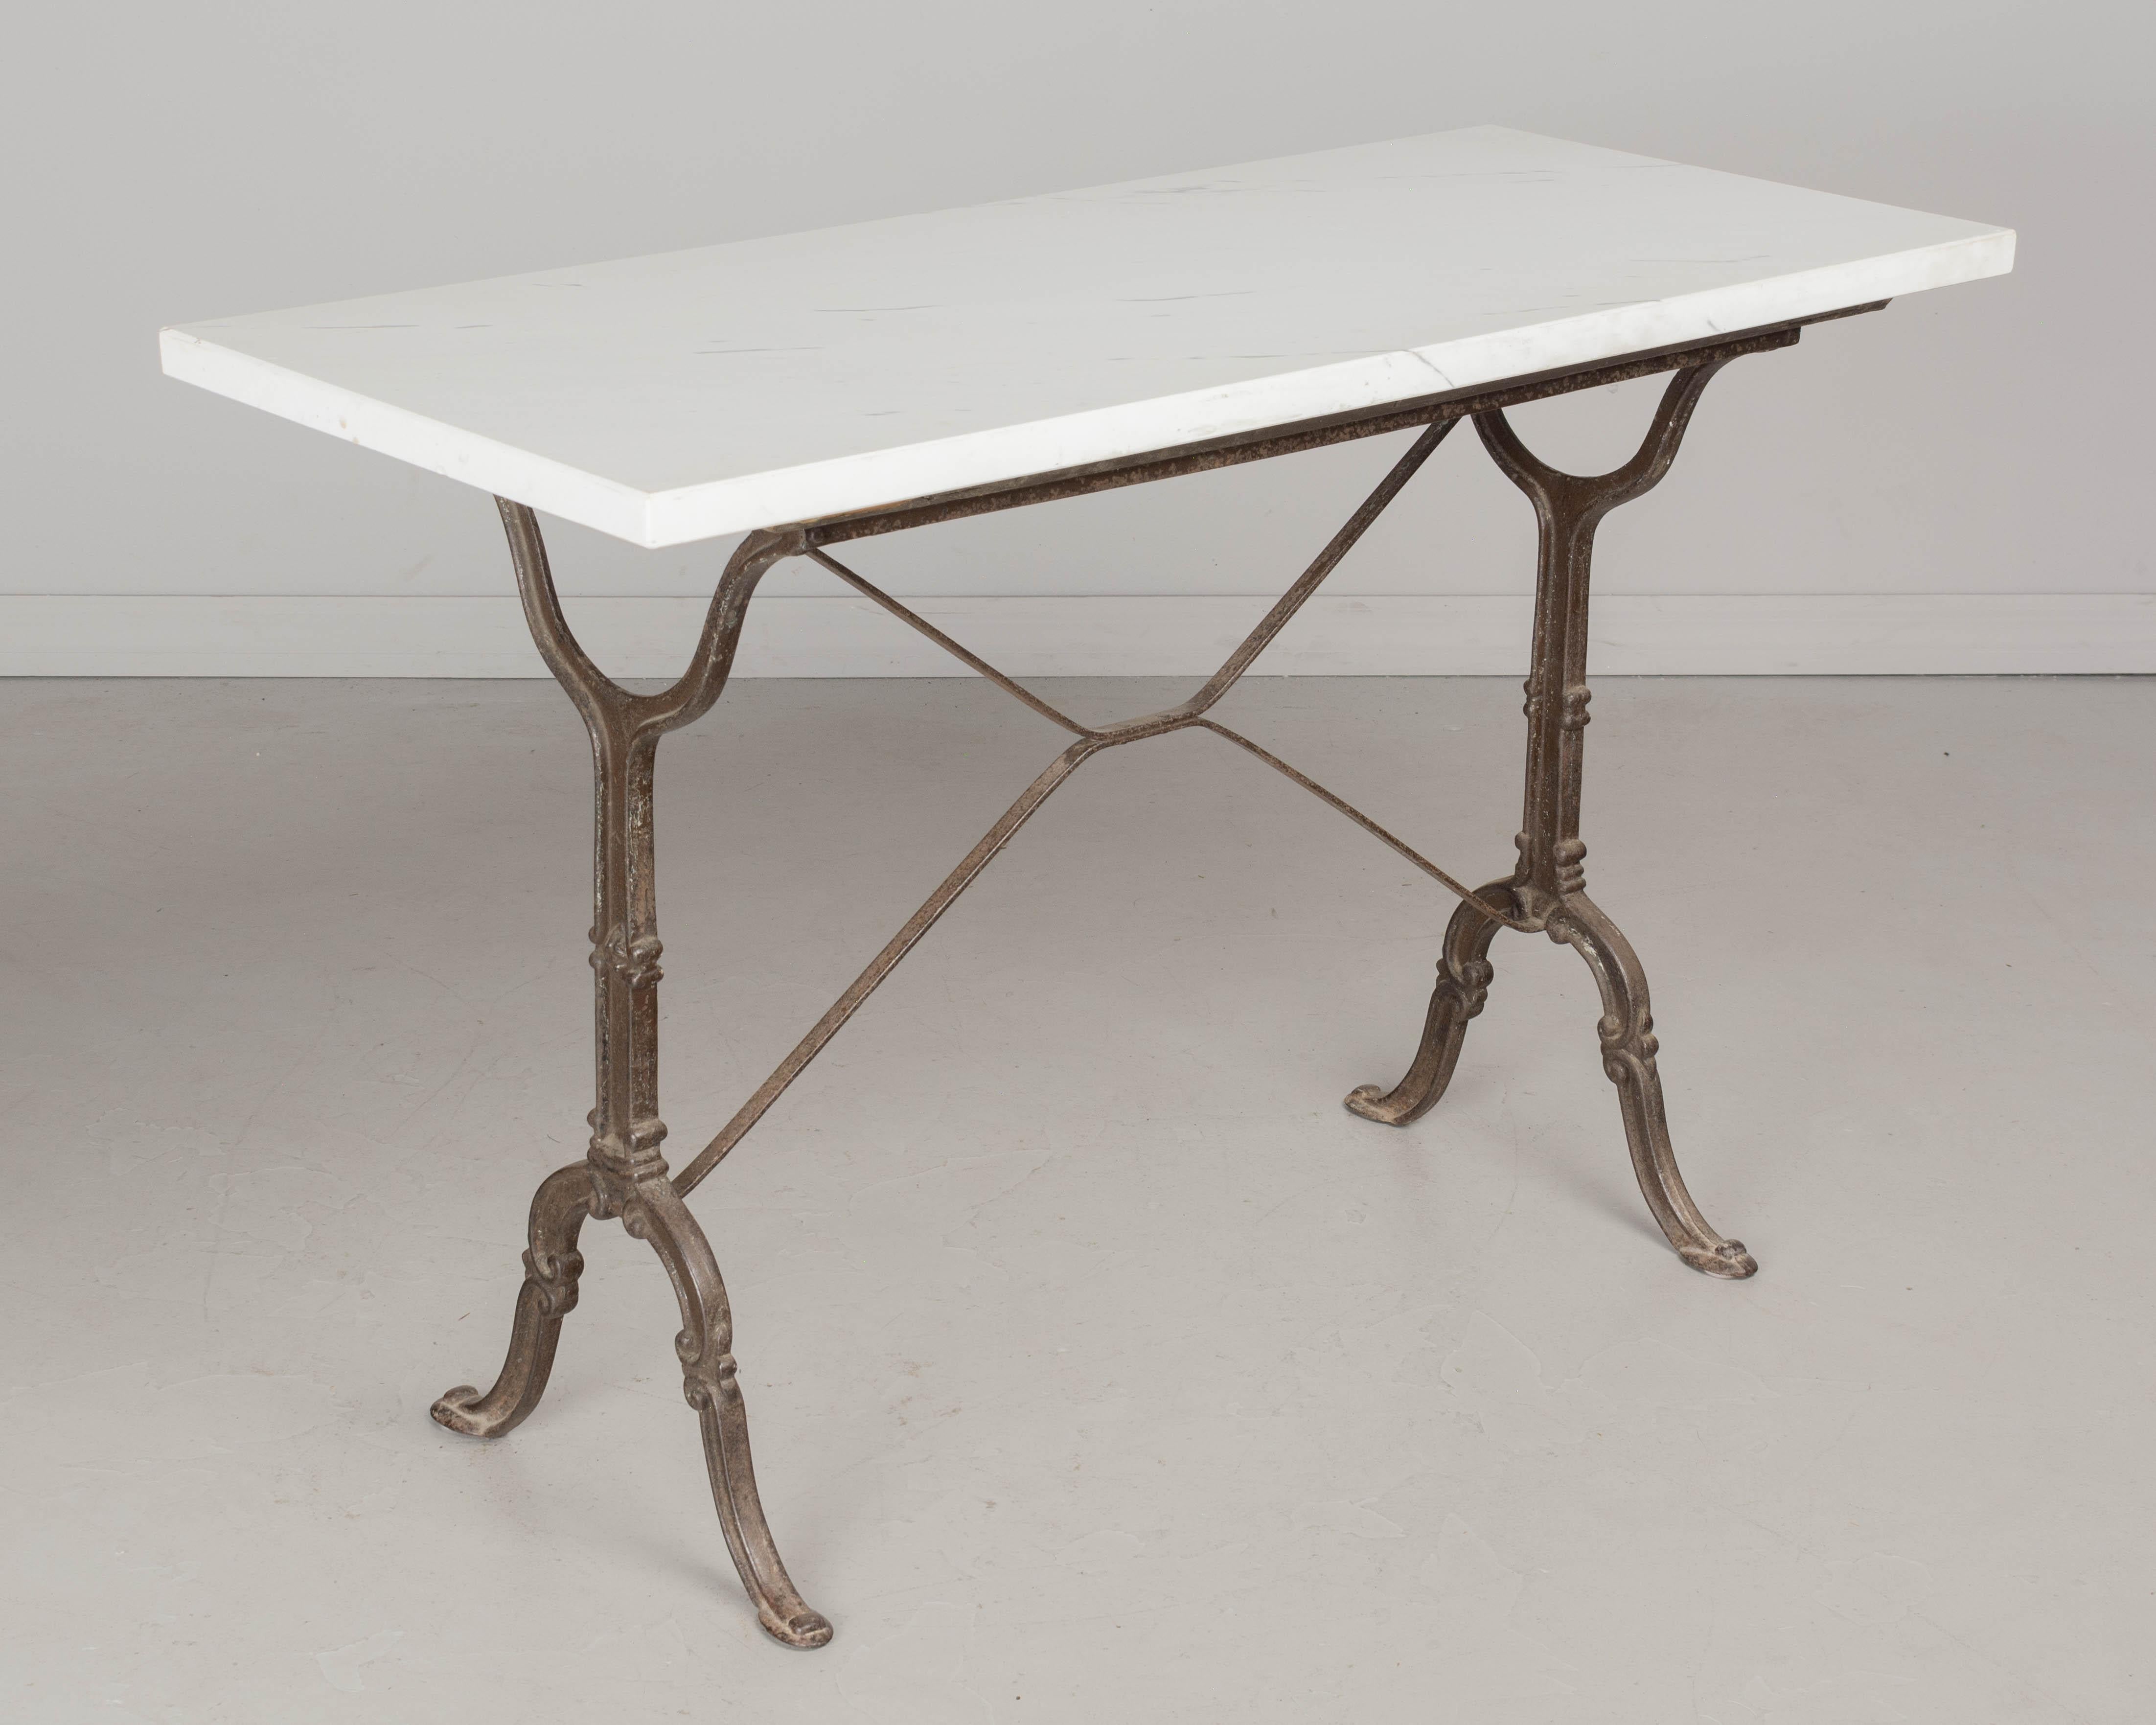 A French cast iron bistro table with newer polished white veined marble top. Perfect for outdoor use. Circa 1900-1910 (marble c. 1980's)
Dimensions: 45.25